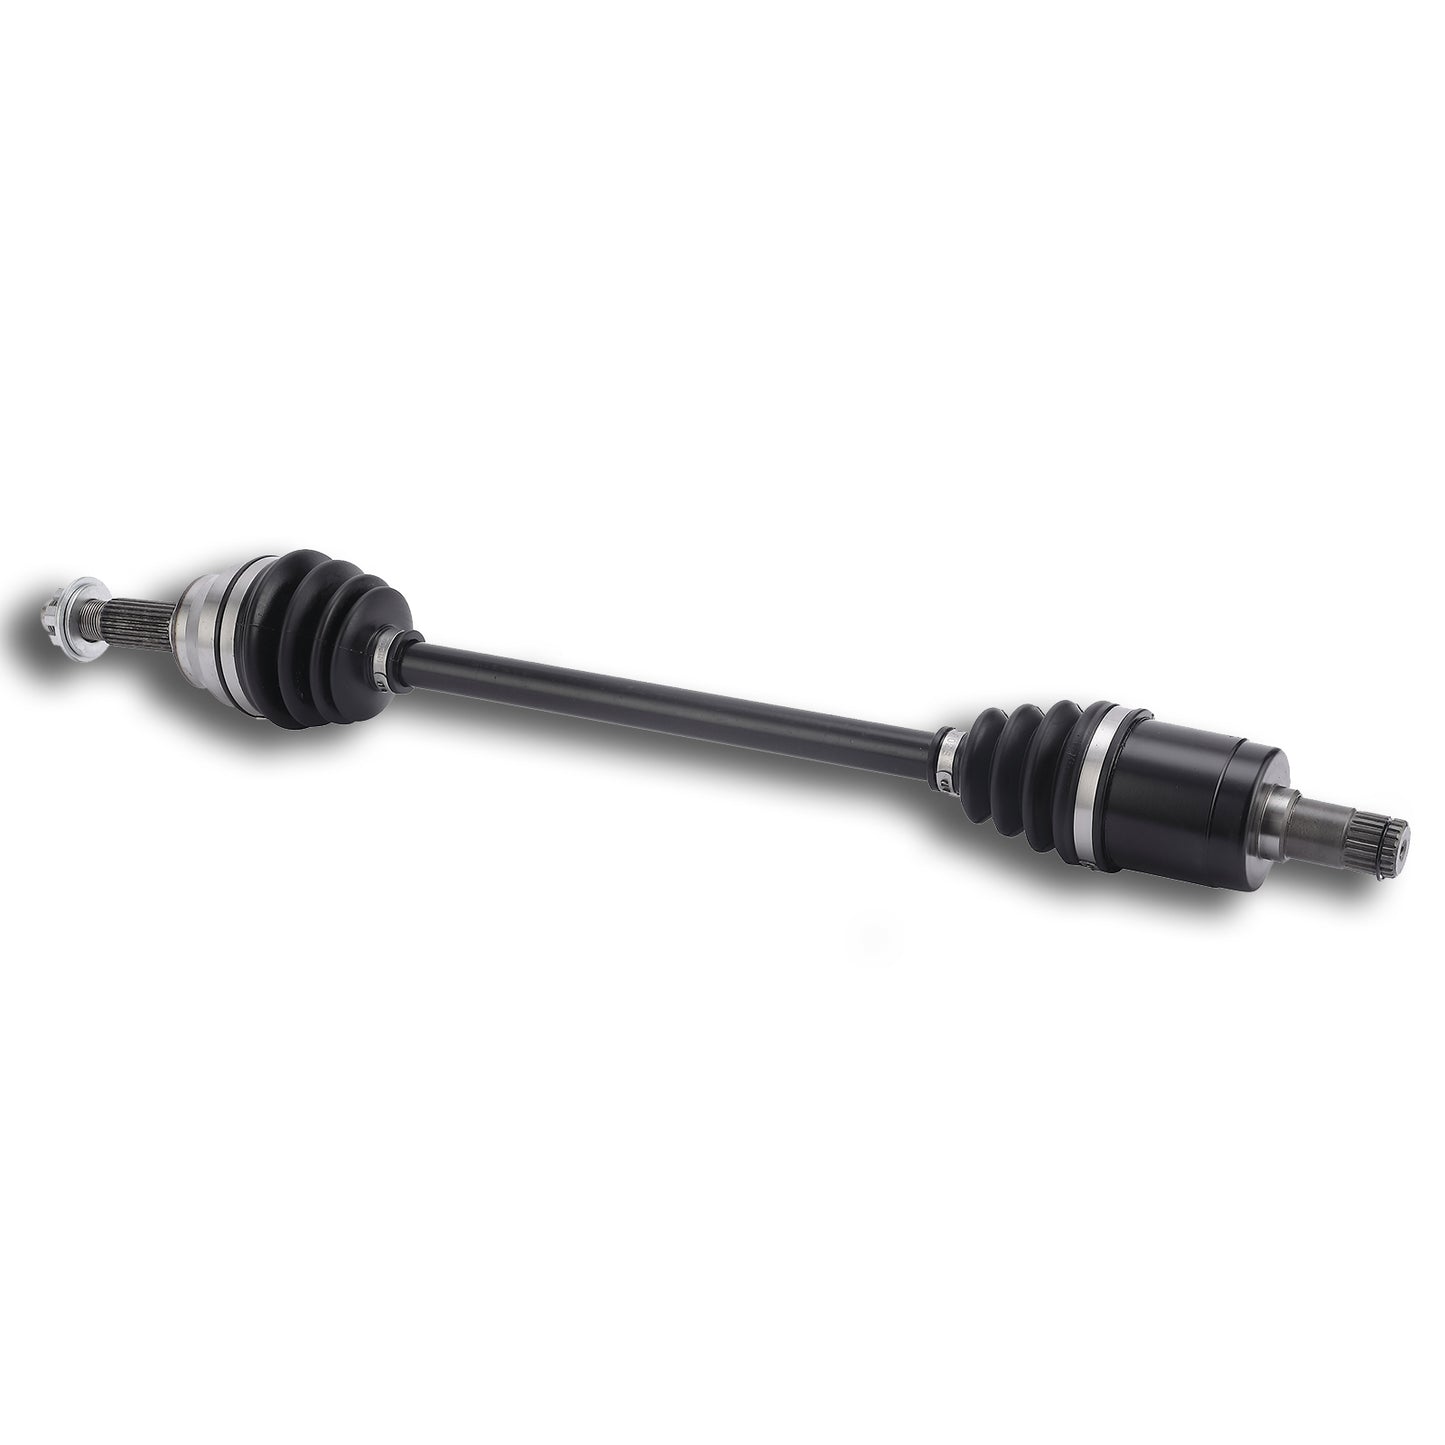 2 CAM-JD102 Front Left Drive Shaft CV Axle Compatible with JOHN DEERE Gator (2013) XUV 550, 550 S4, 850i BF AM145189 AM145326